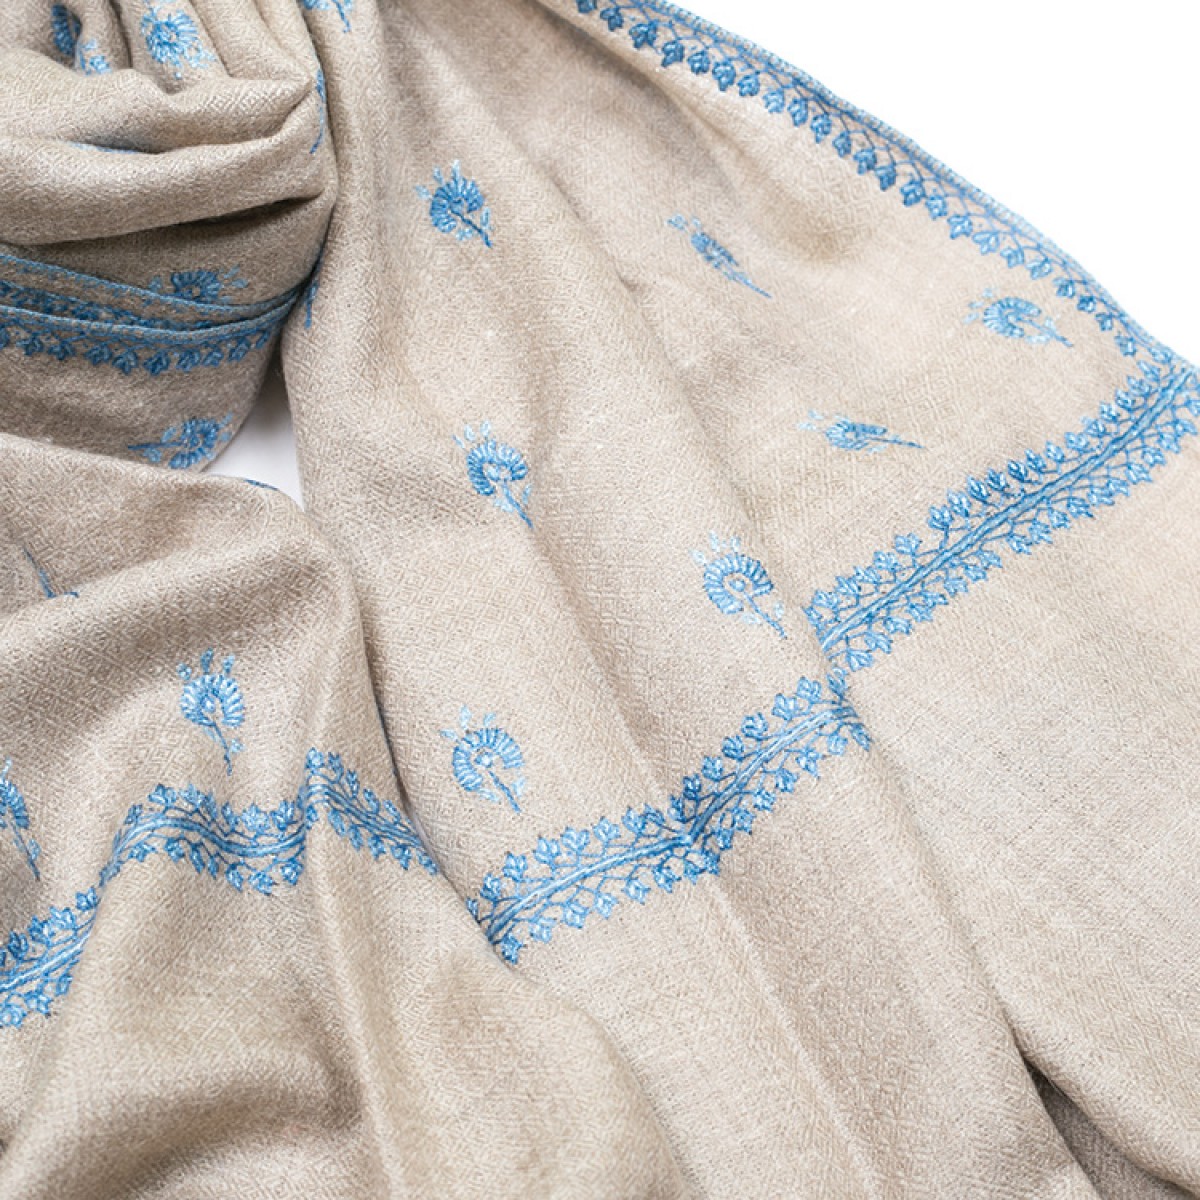 Embroidered Pashmina Stole - Natural & Blue